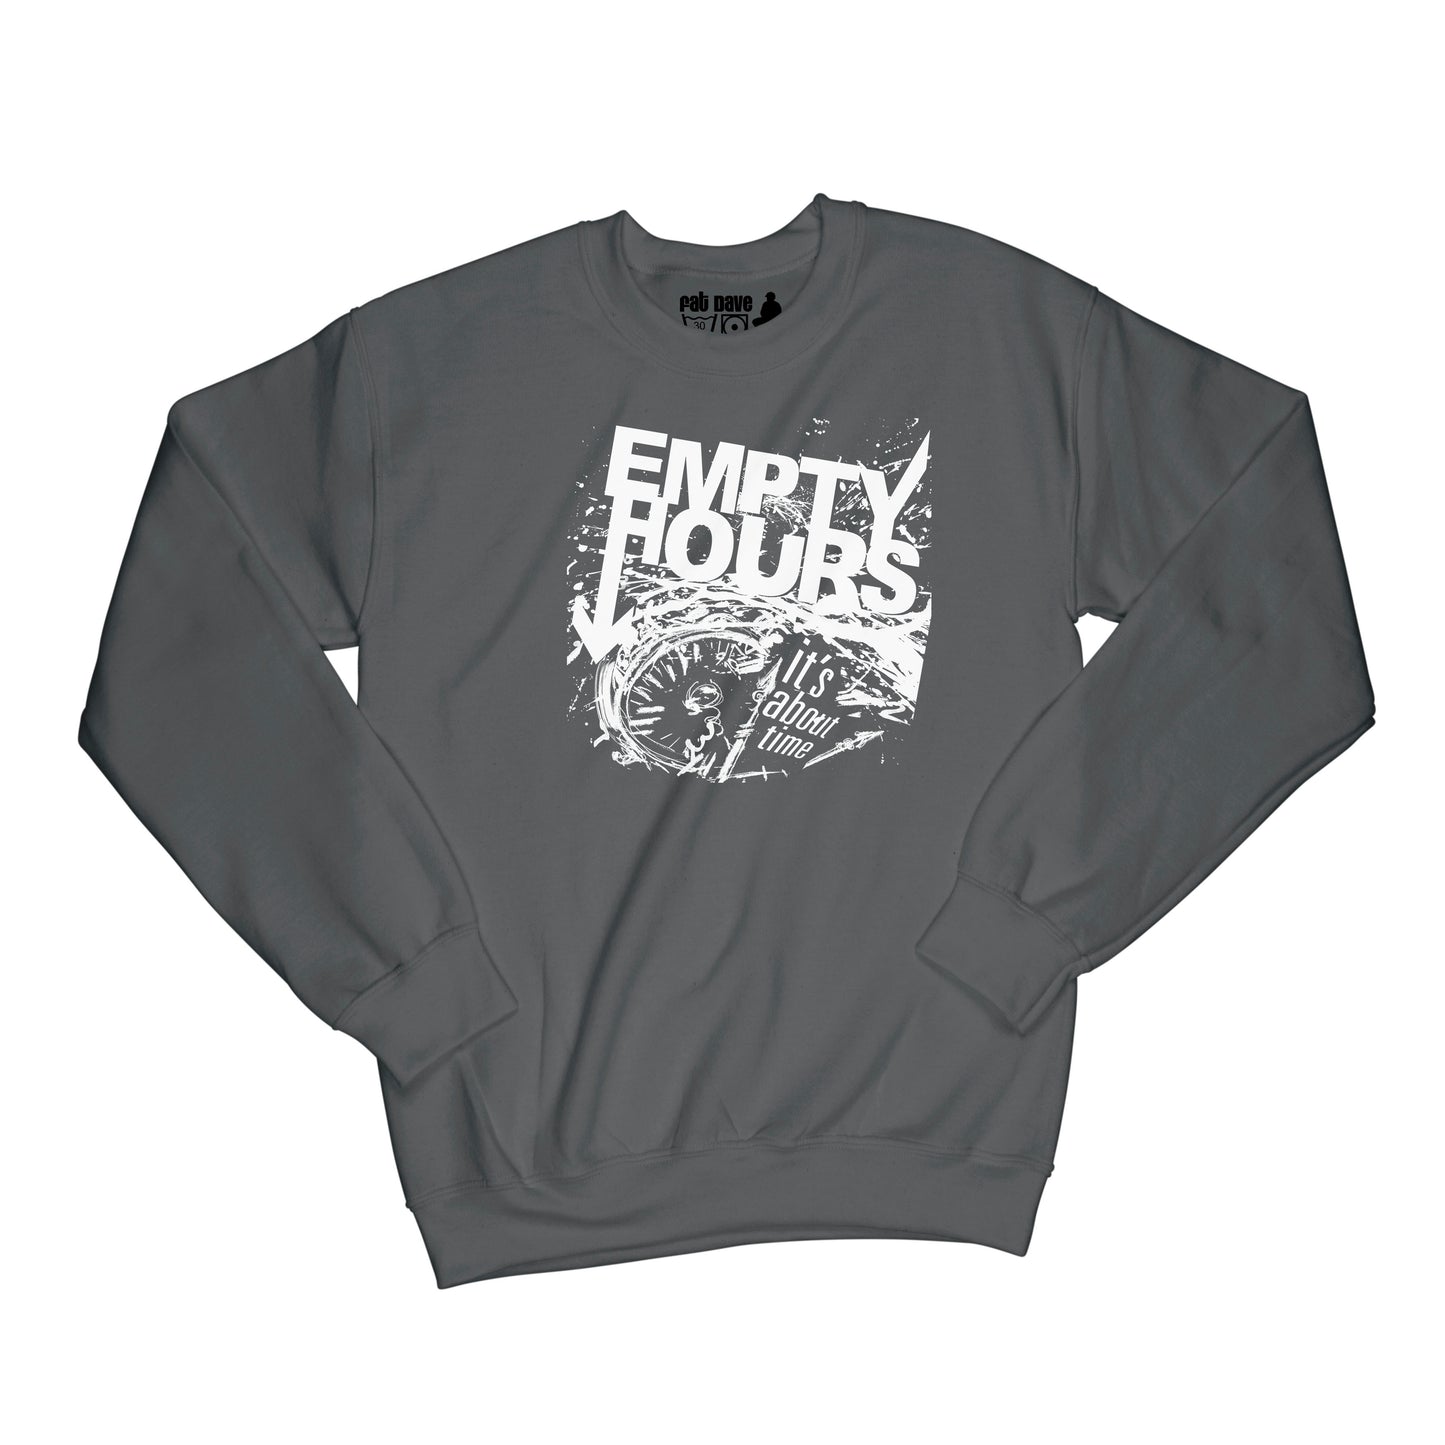 Brantford, Empty Hours, Fat Dave, It's About Time album cover, Musician, Sweatshirt, Black/White